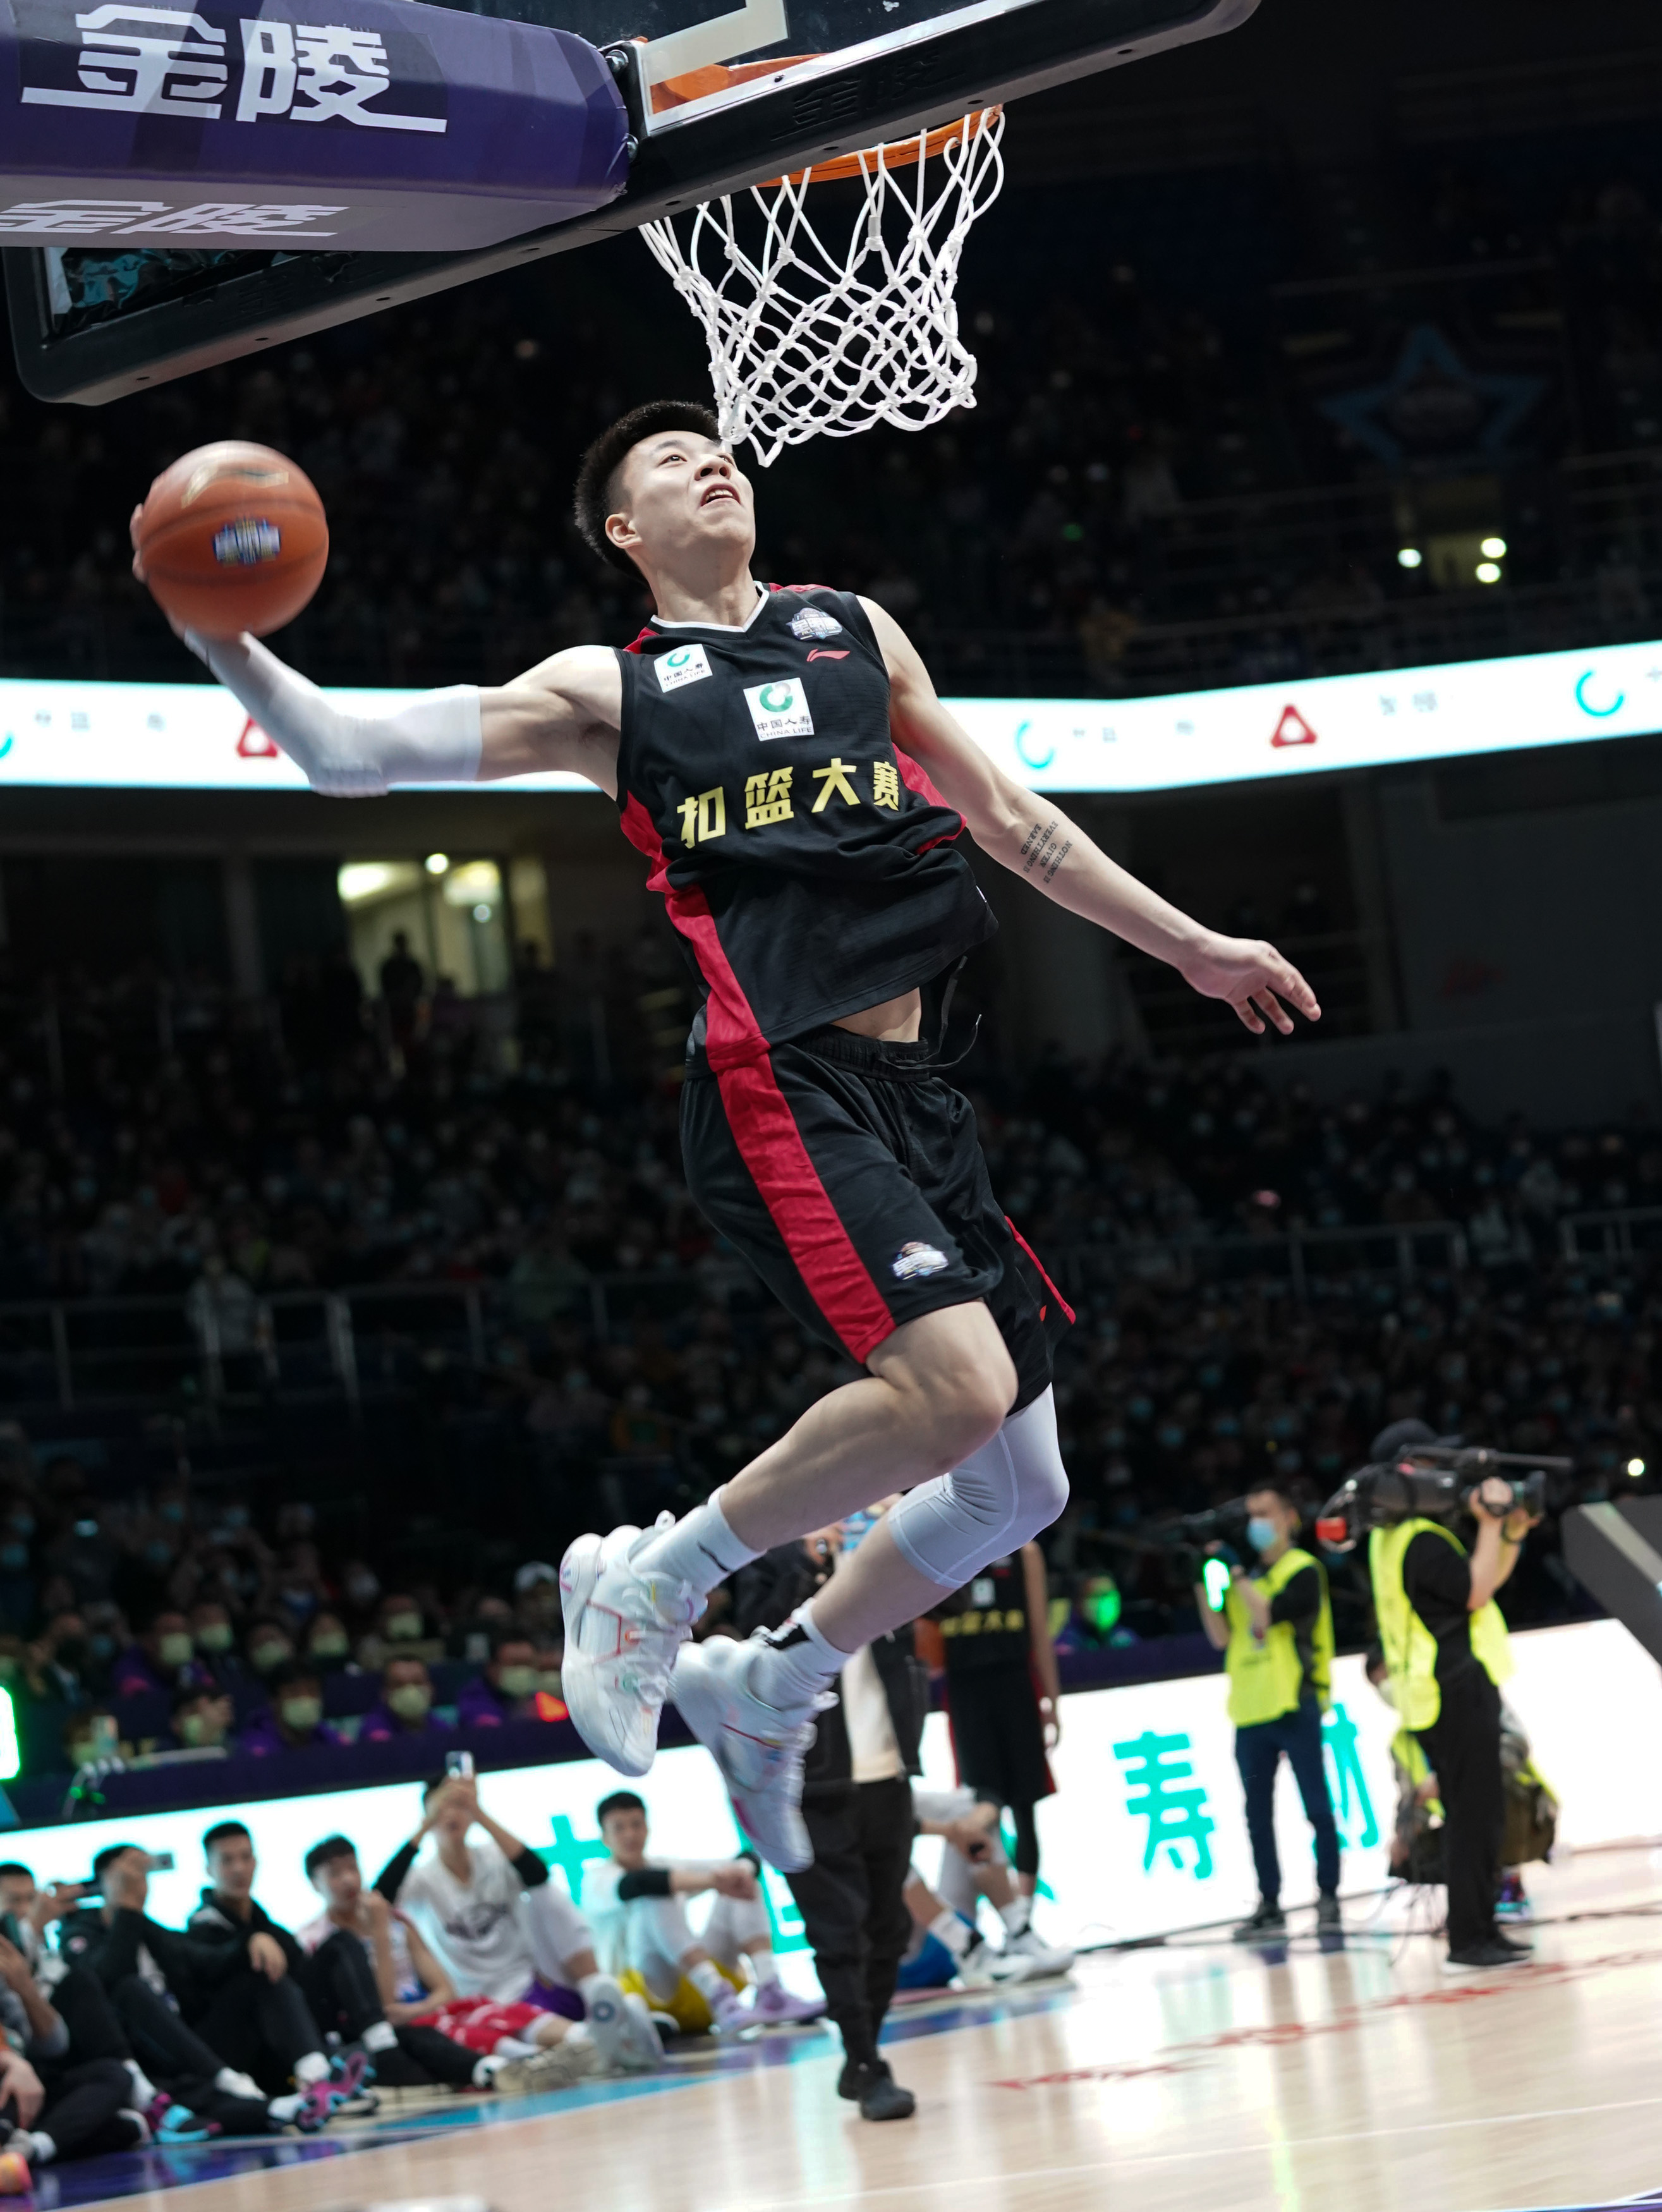 Basketball -- contest of CBA complete star: Zhang Zhenlin wins championship of the contest that buckle basket